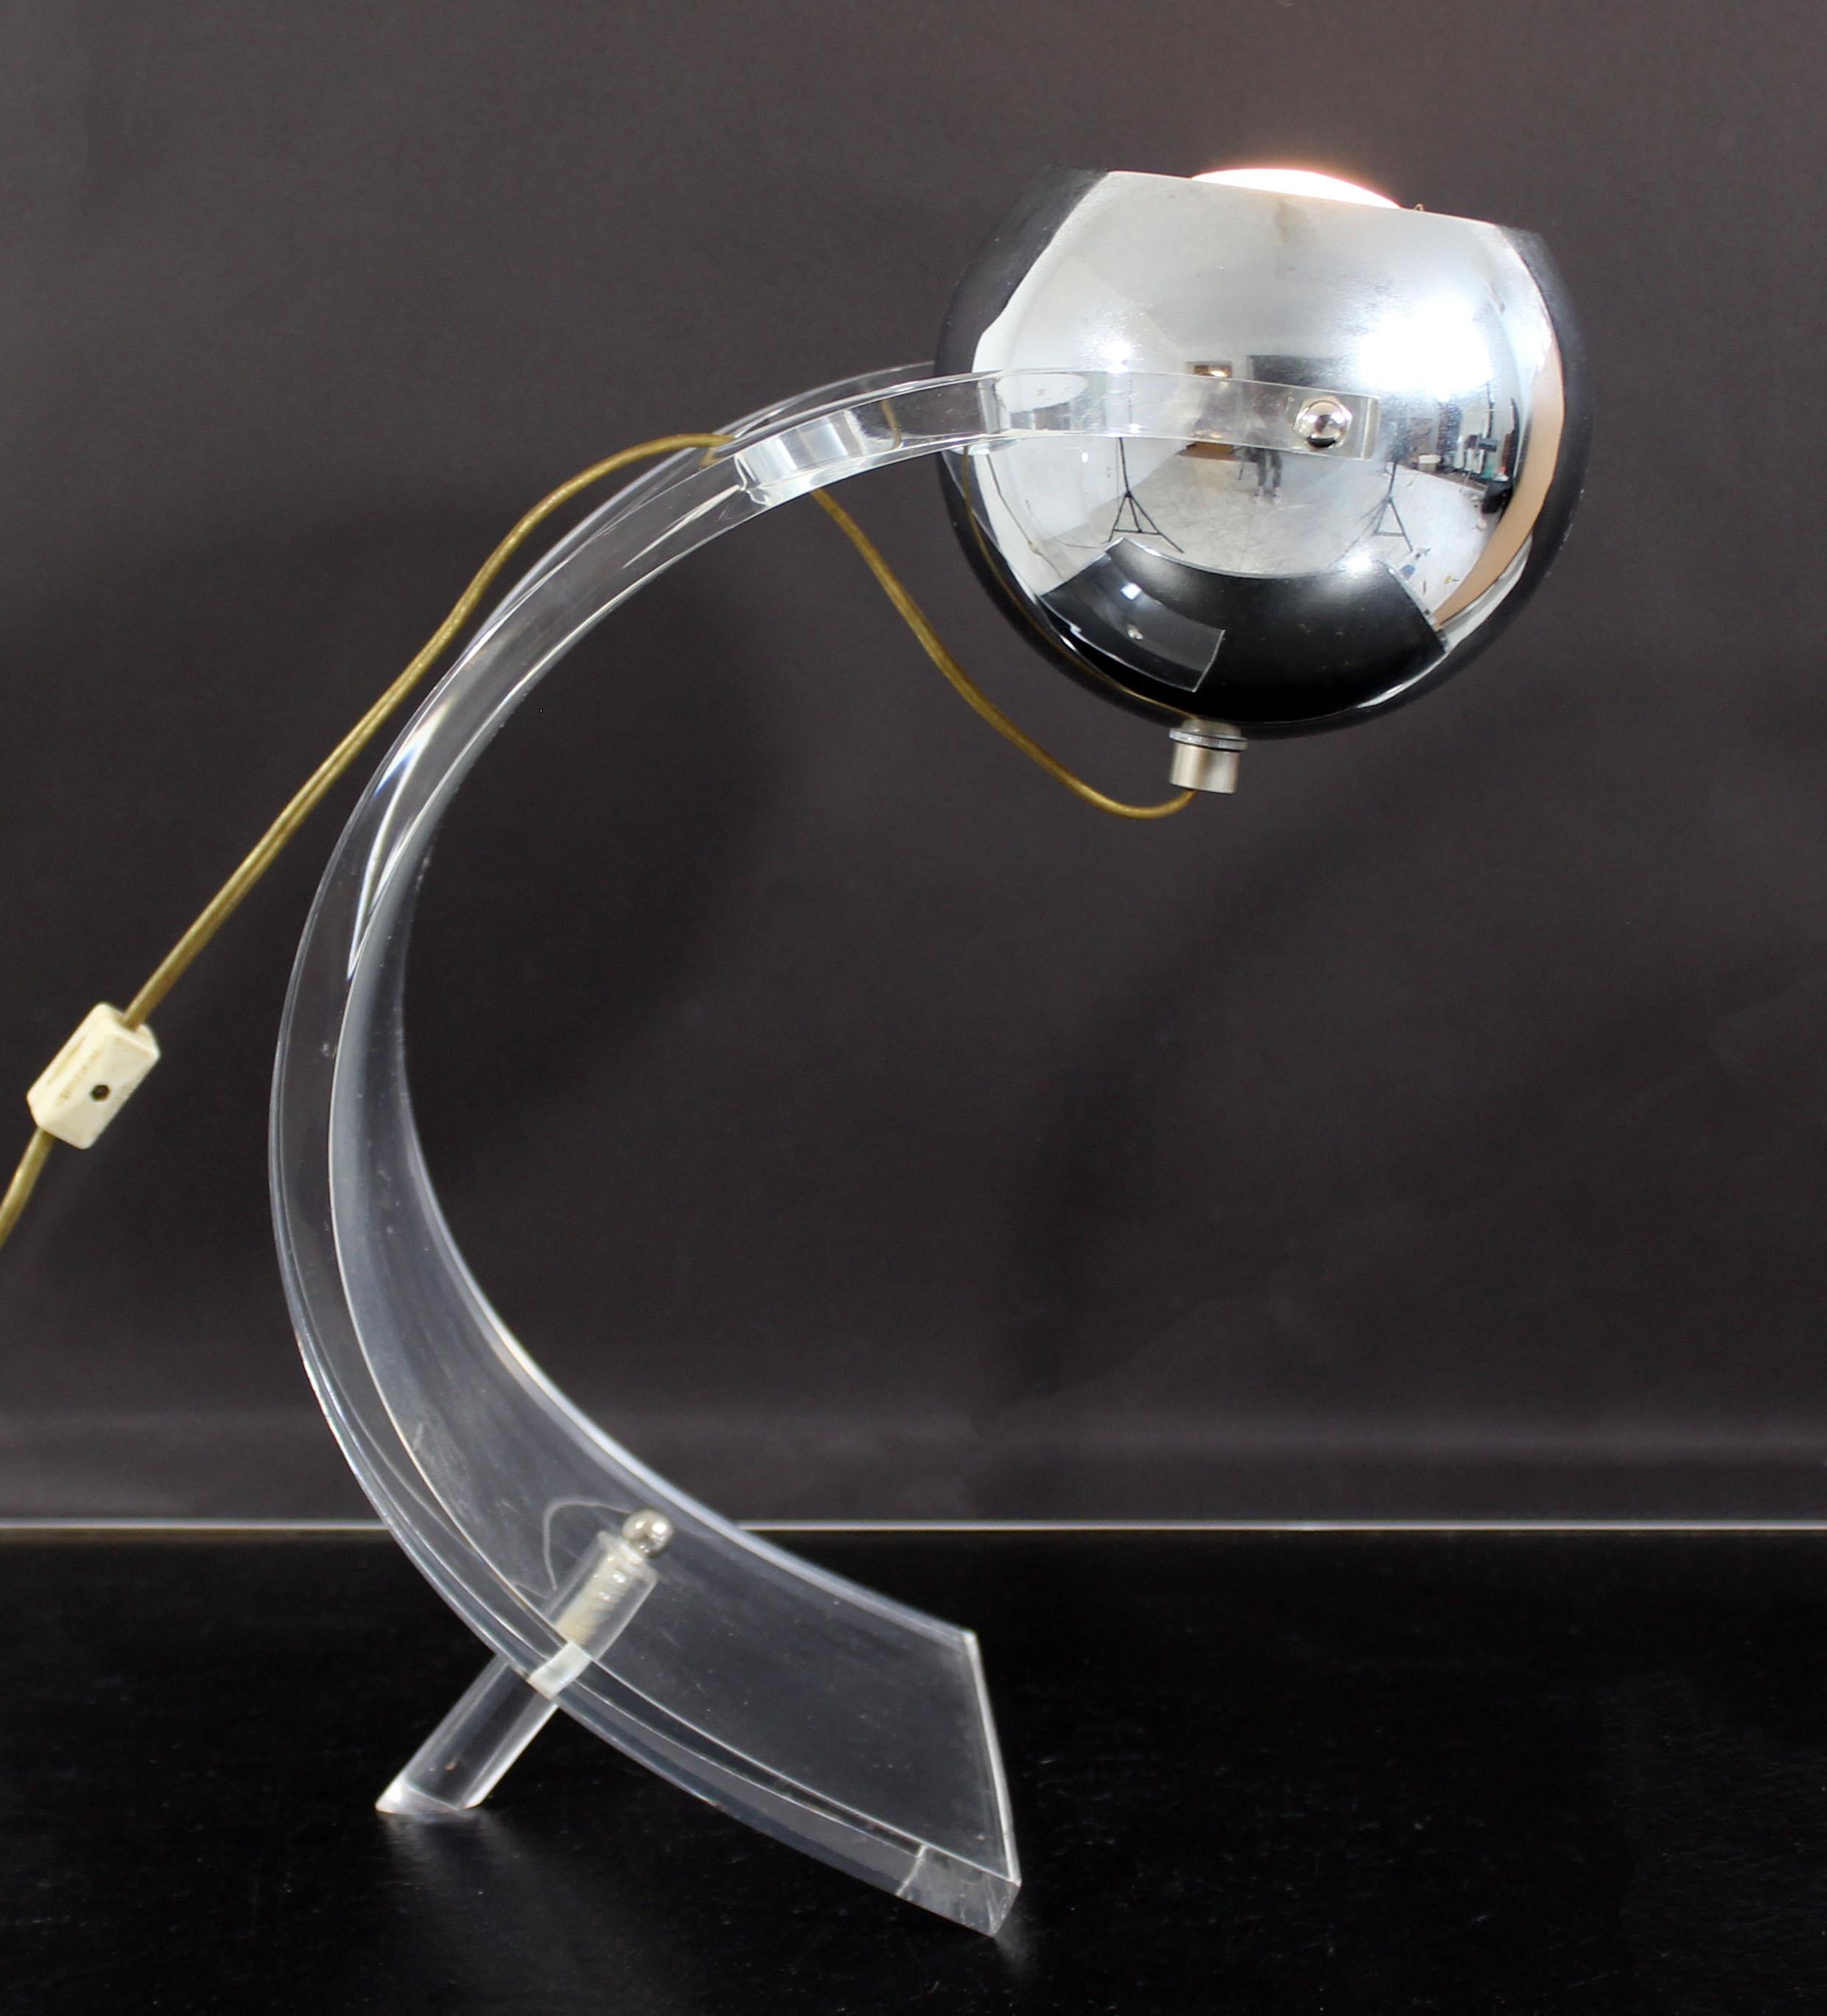 For your consideration is a fabulous, curved clear Lucite and chrome bulb table lamp by Robert Sonneman, circa the 1970s. In very good condition. The dimensions are 8